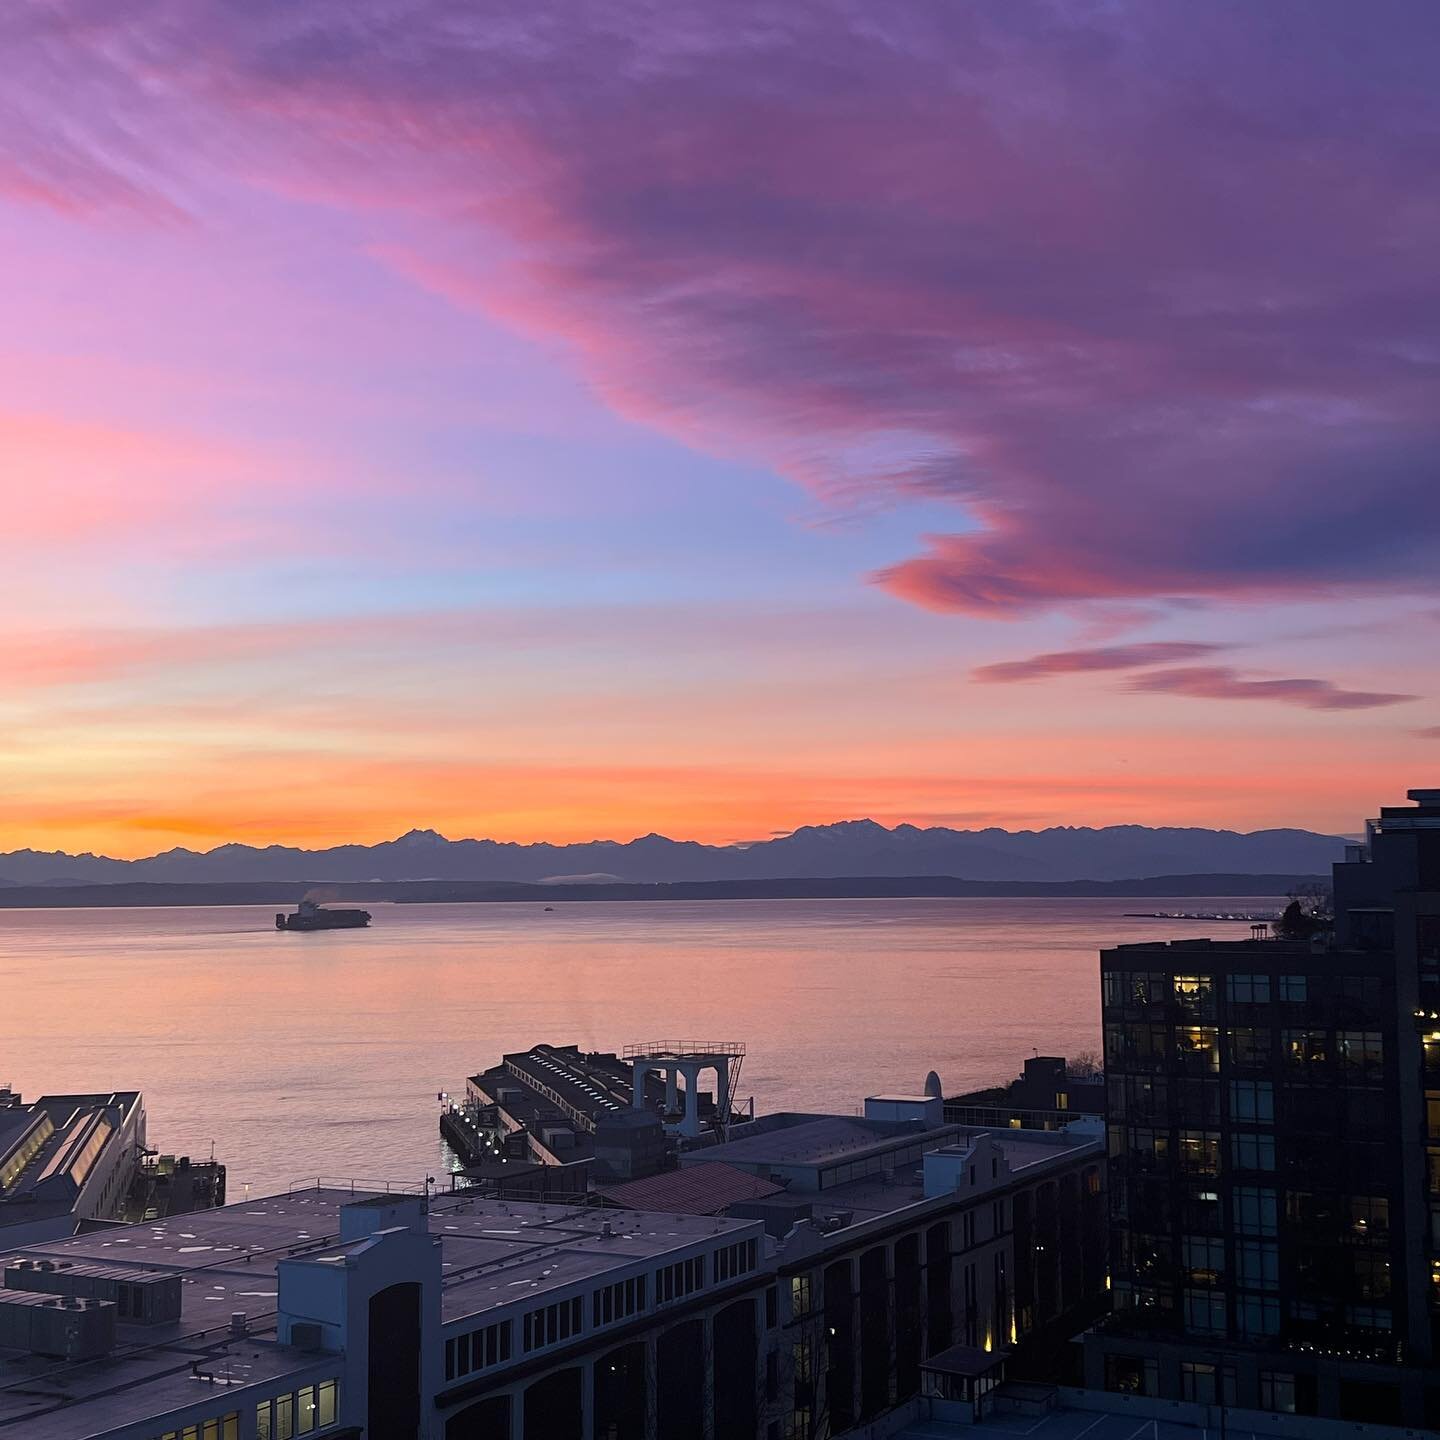 A truly spectacular sunset tonight #seattle #seattlesunset